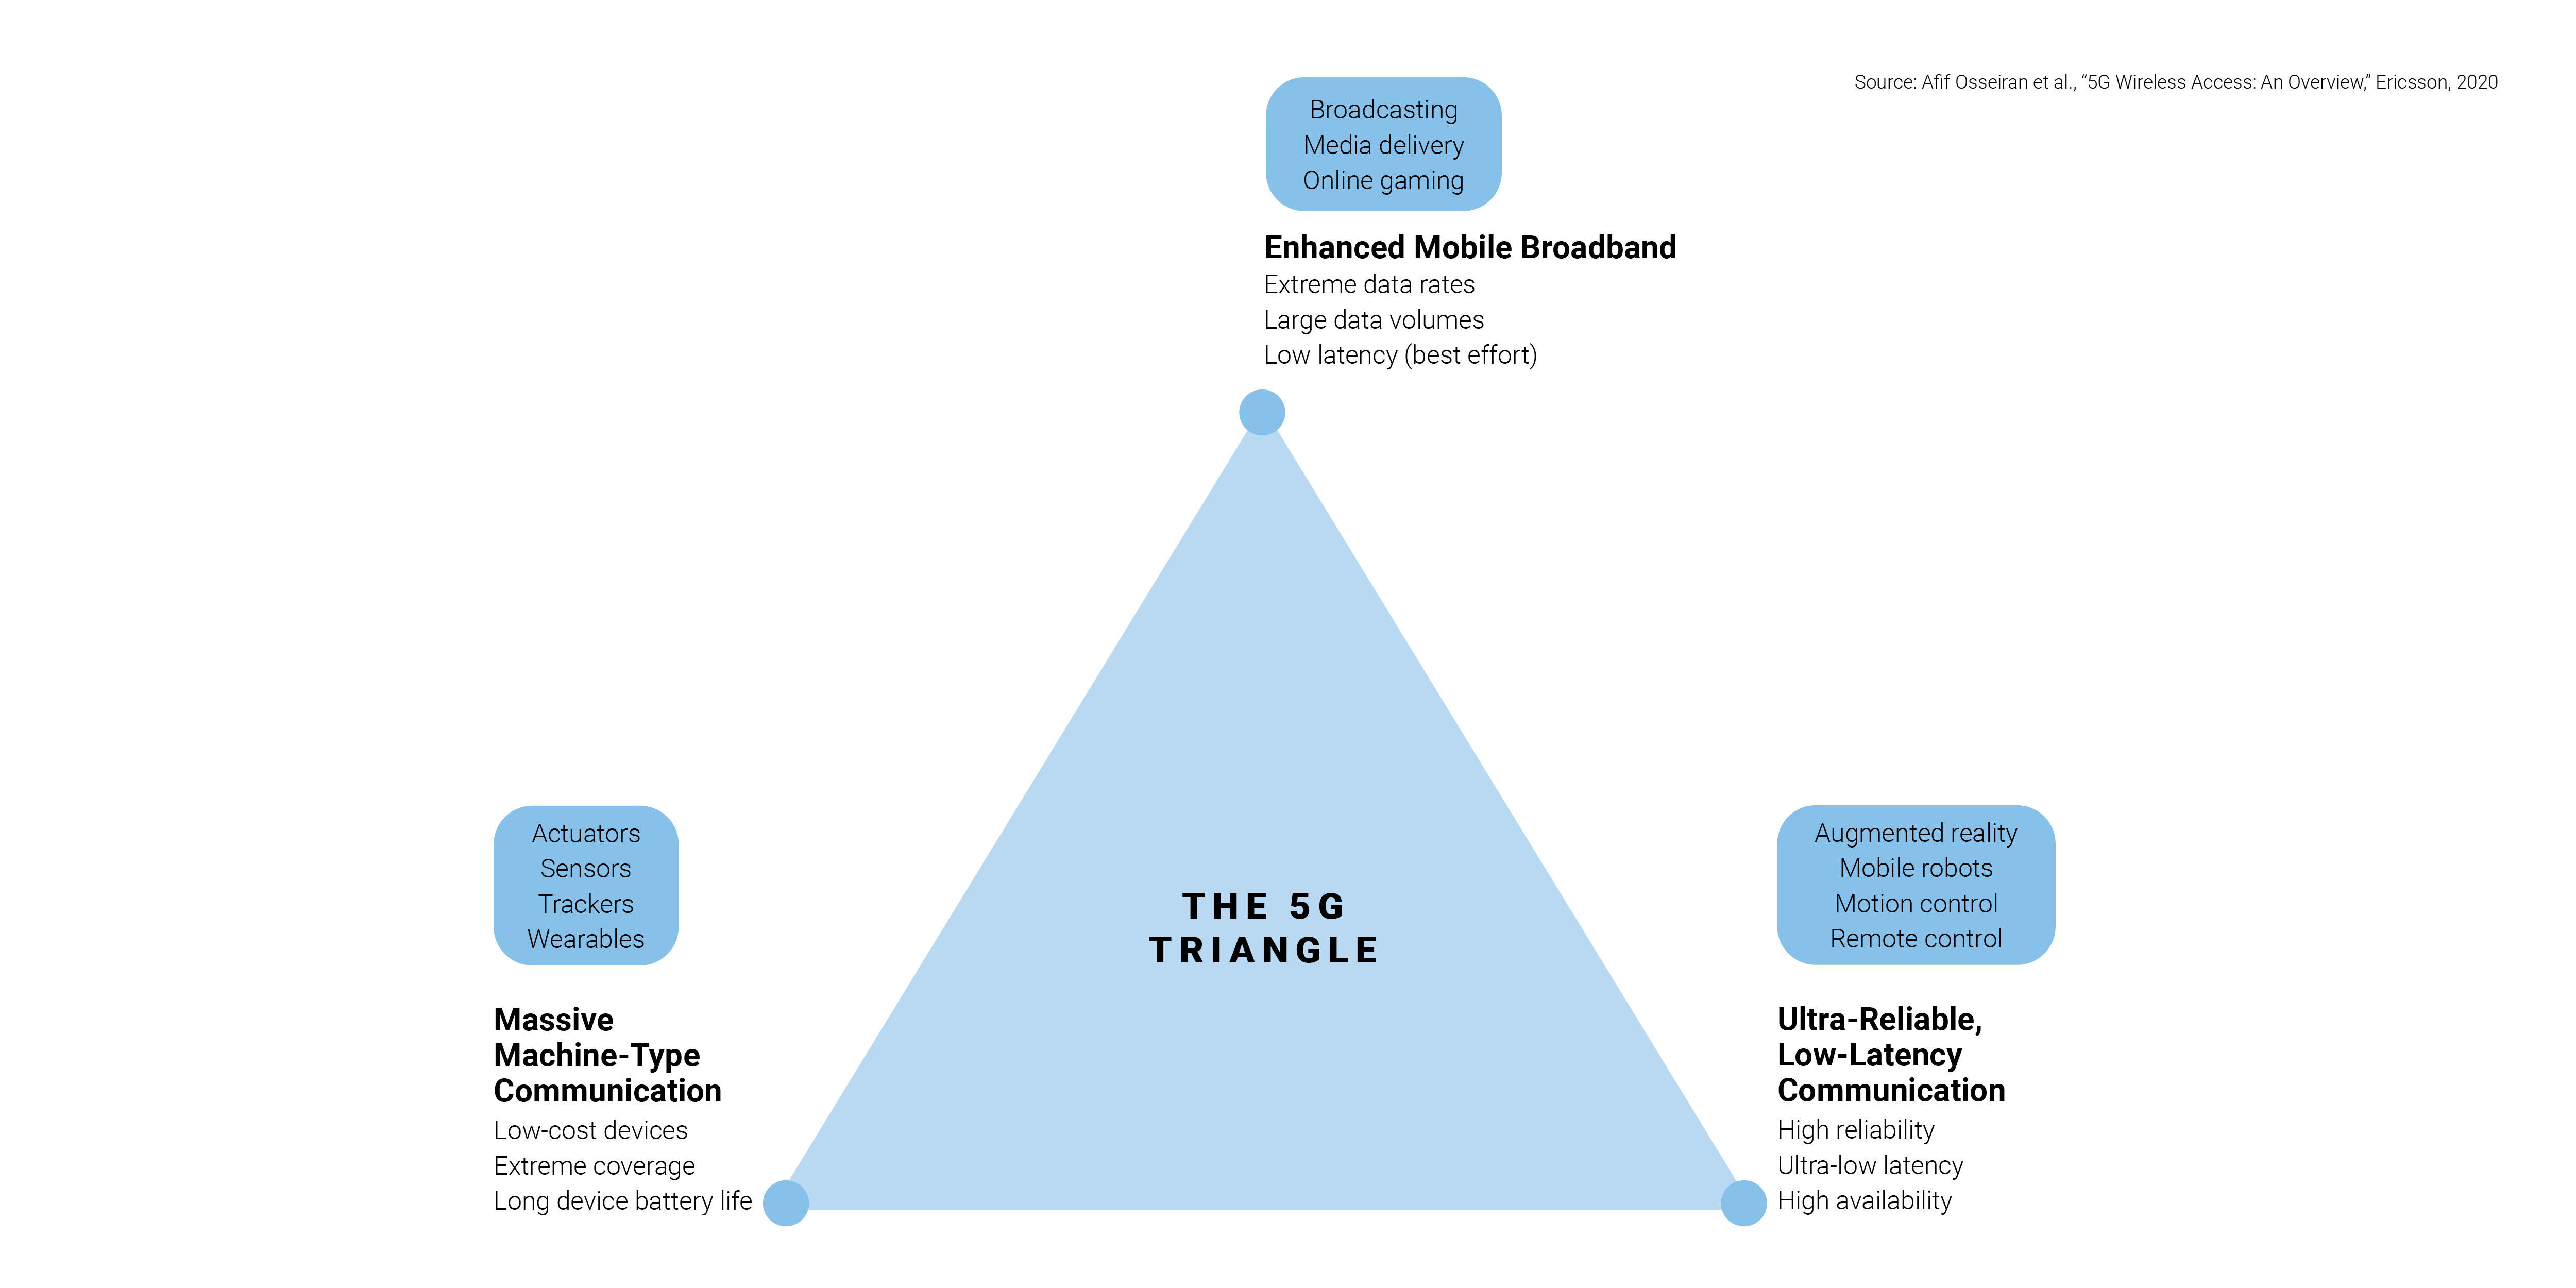 The 5G Triangle